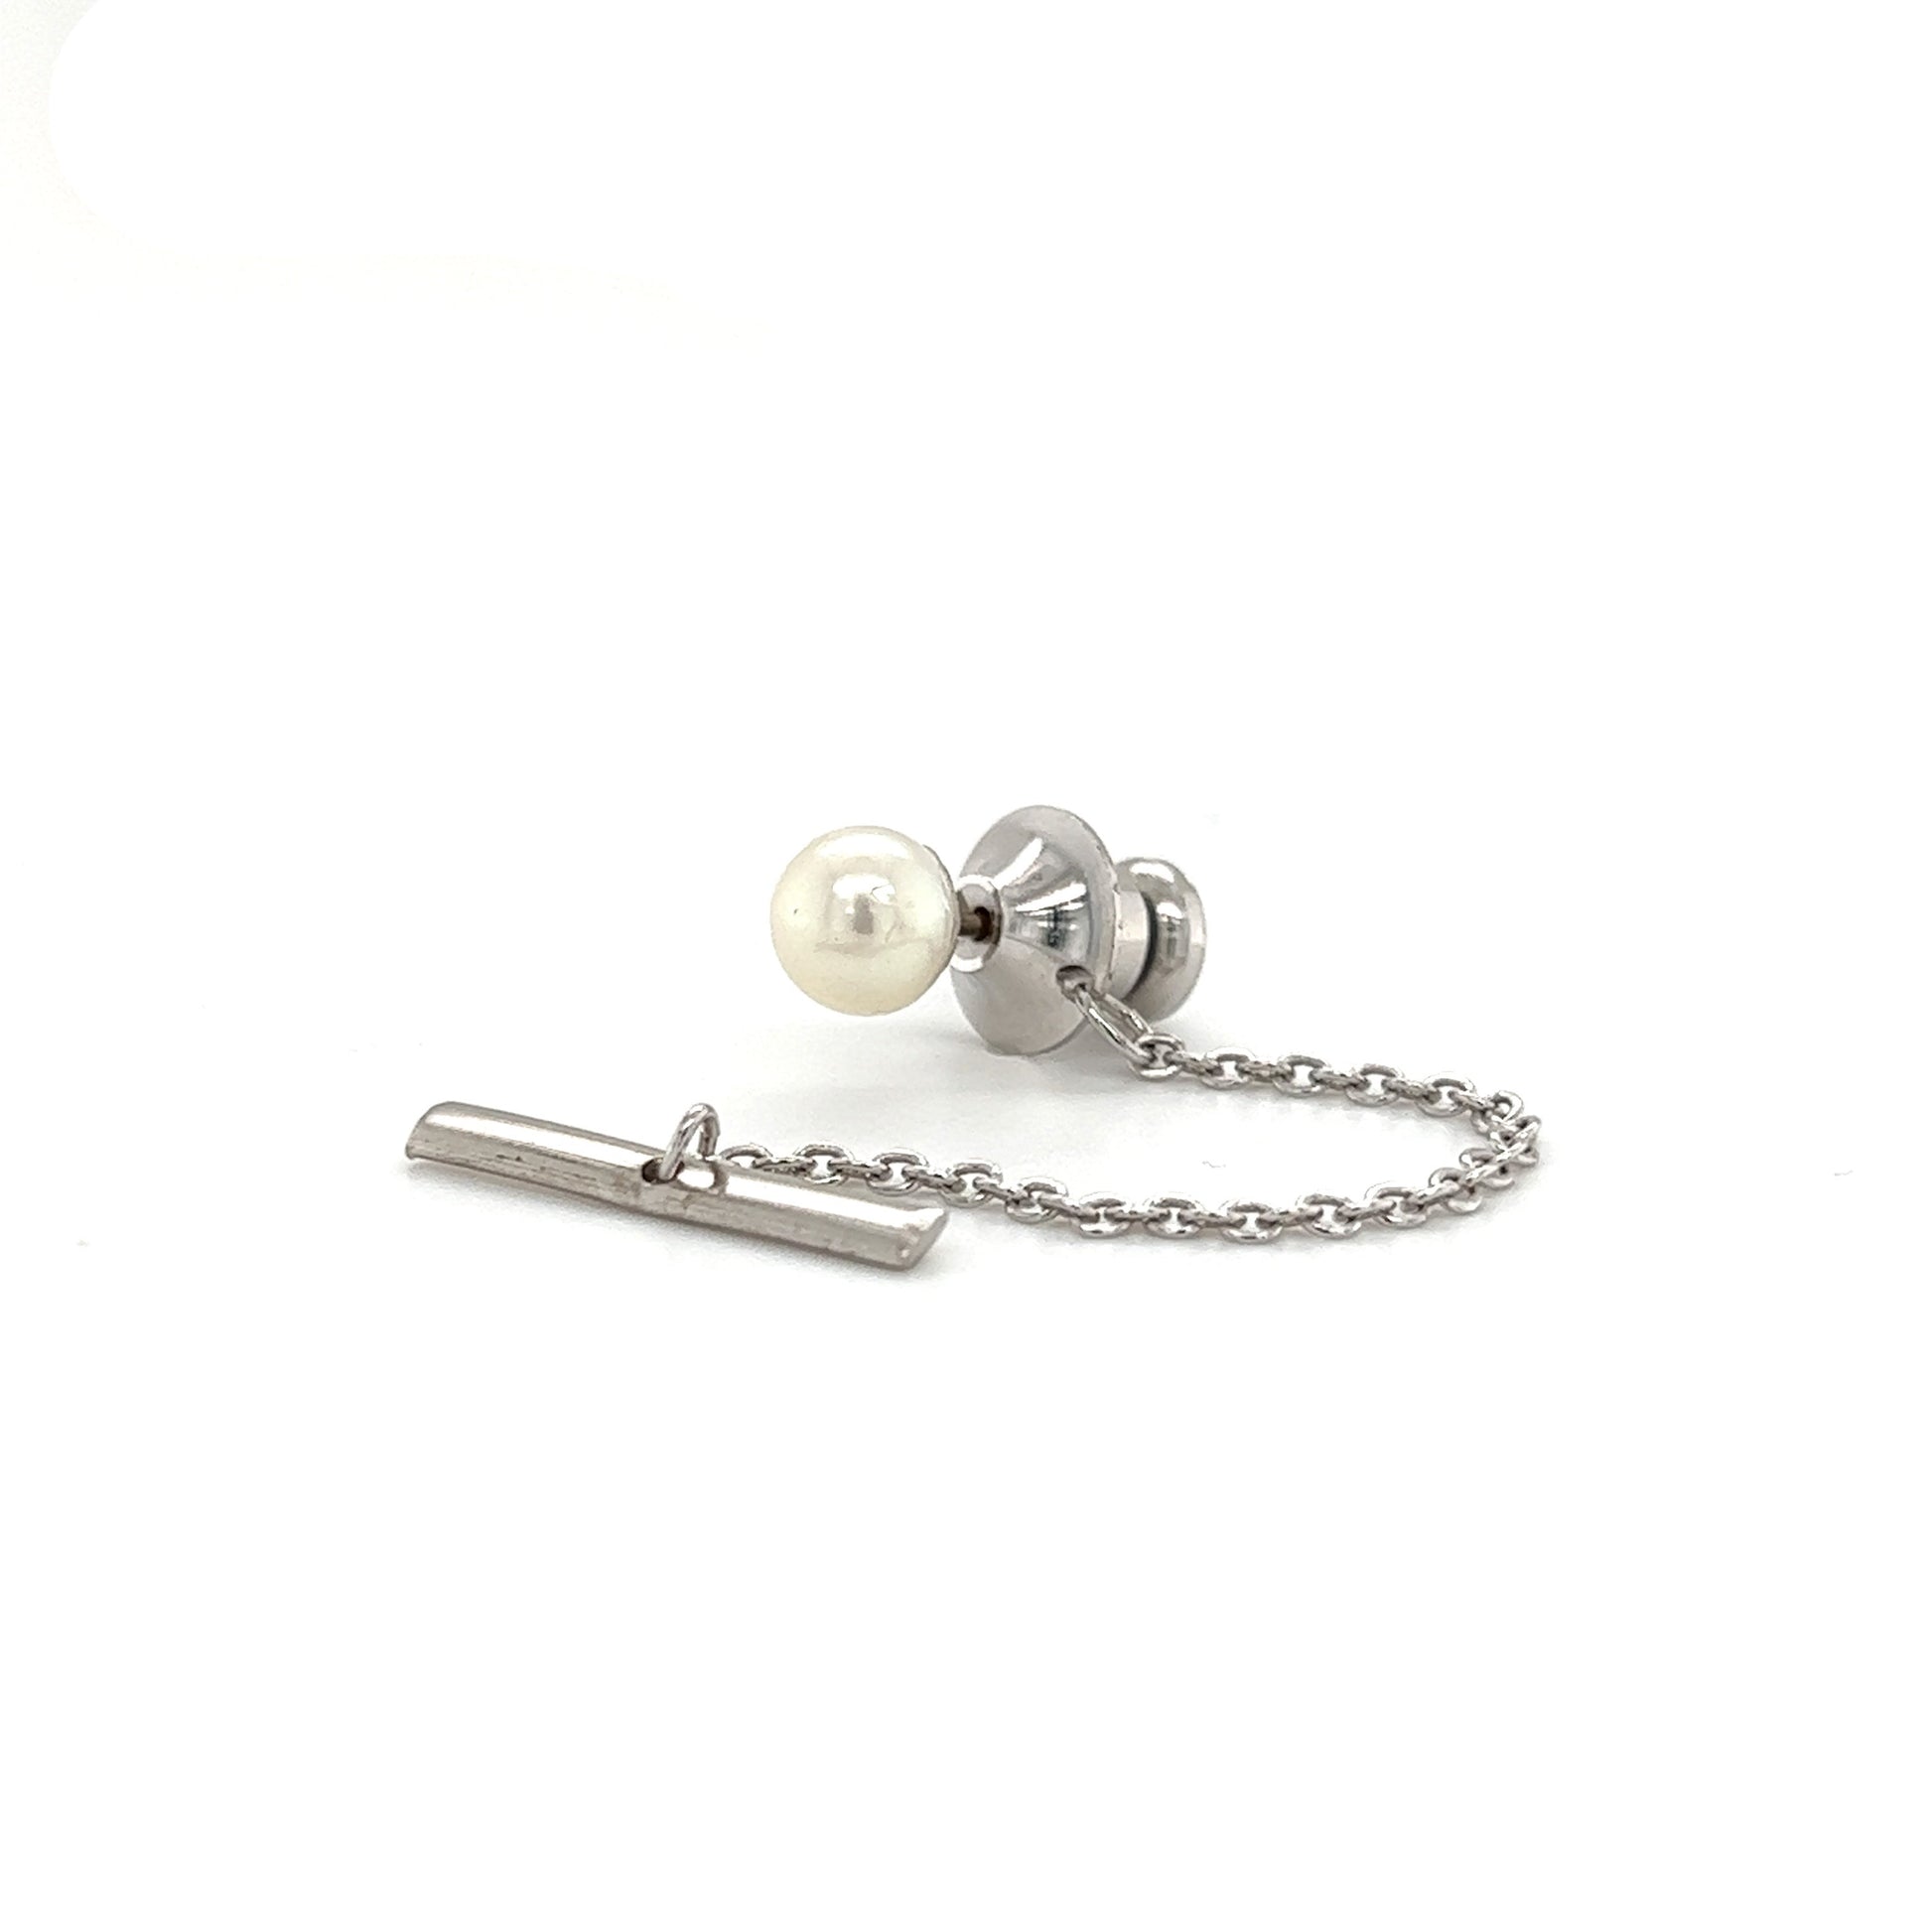 Pin Tie Tack with 6mm White Pearl in Sterling Silver Assembly View